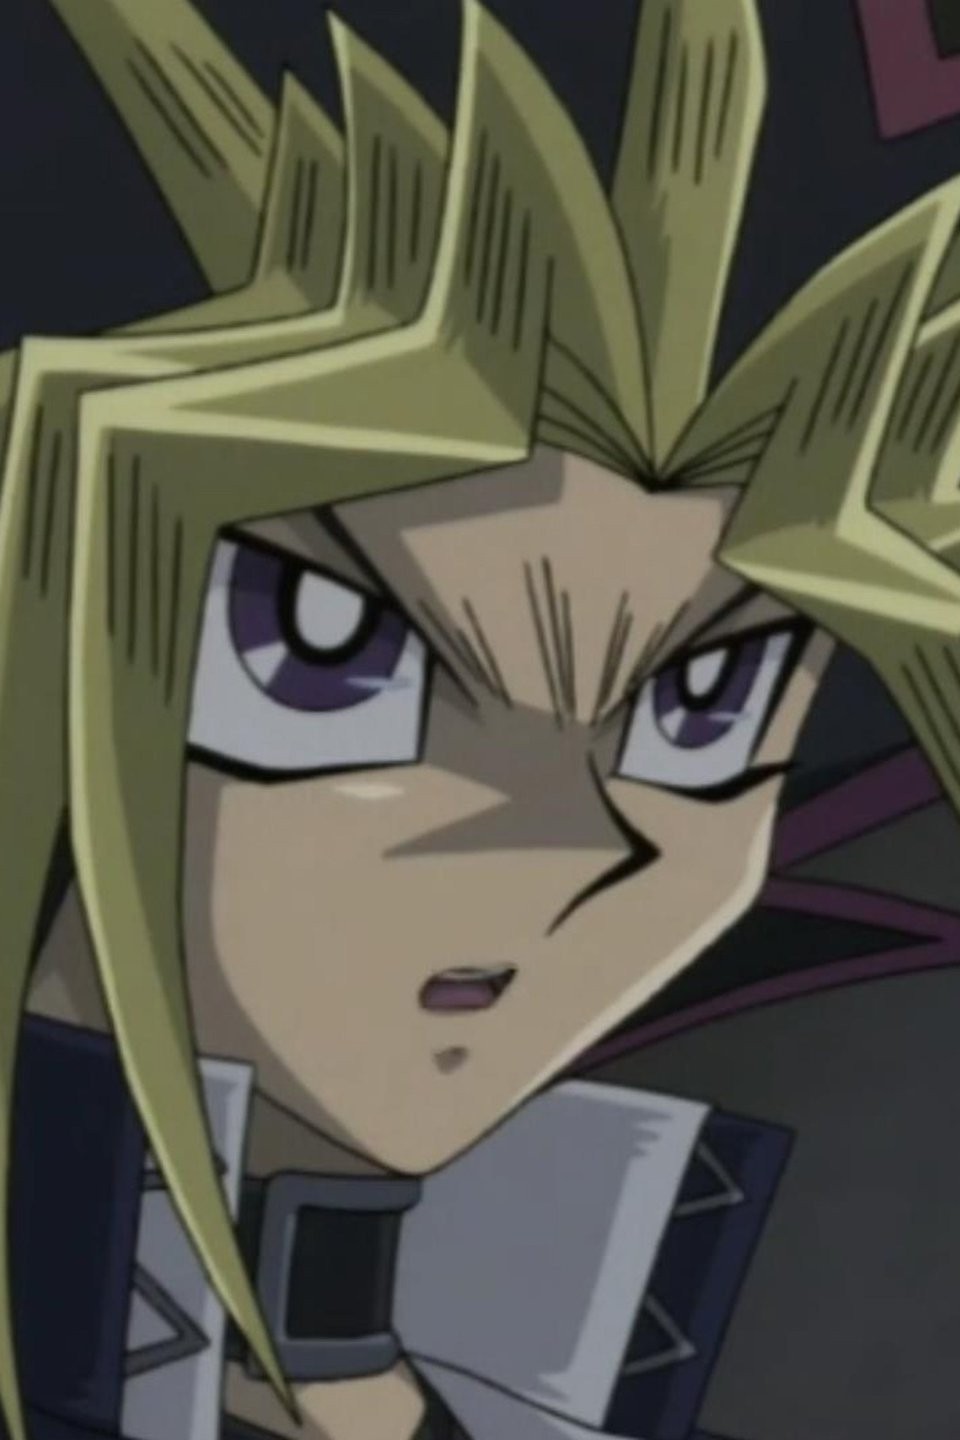 Yu-Gi-Oh!: The Dark Side of Dimensions - Rotten Tomatoes